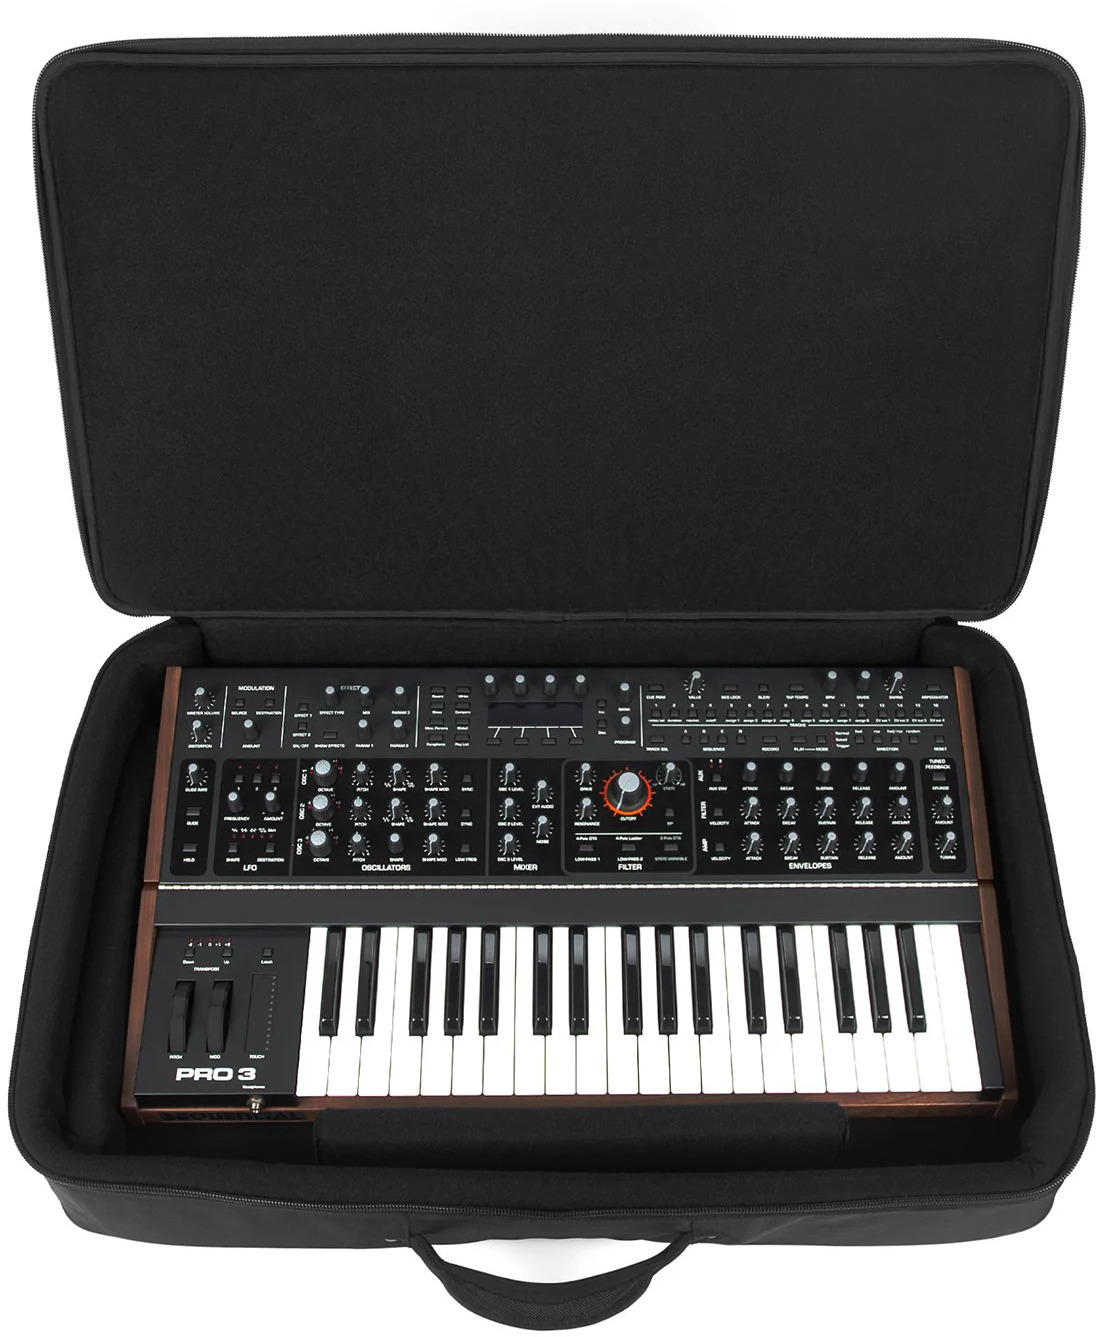 Analog Cases Sustain Case Sequential Pro 3 / Behringer Odyssey - Gigbag for Keyboard - Main picture